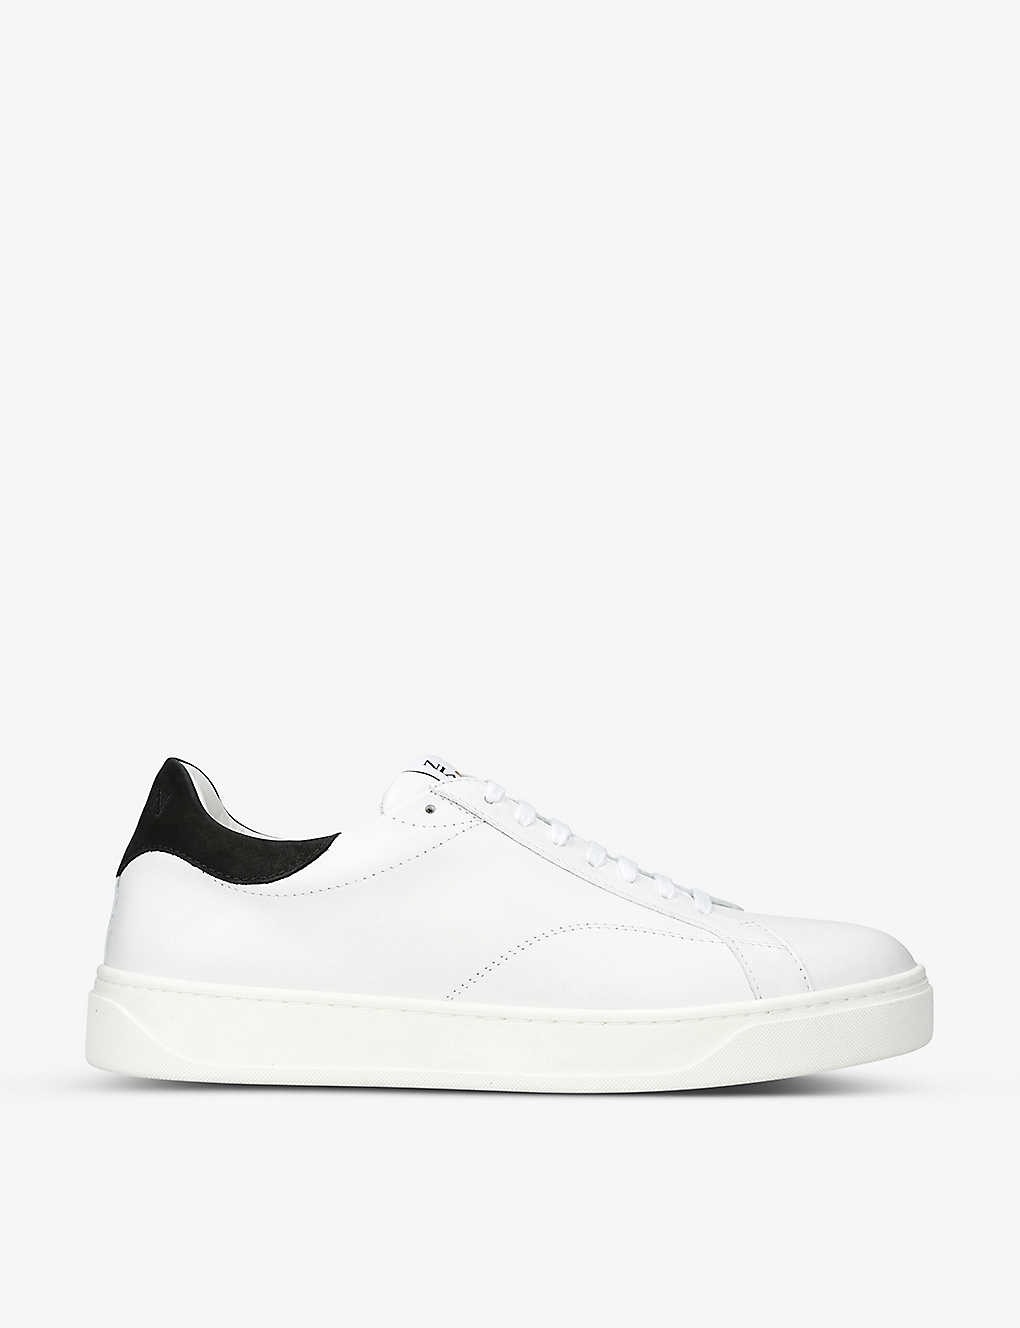 Lanvin Dbb0 Logo-embroidered Leather Low-top Trainers In White/blk